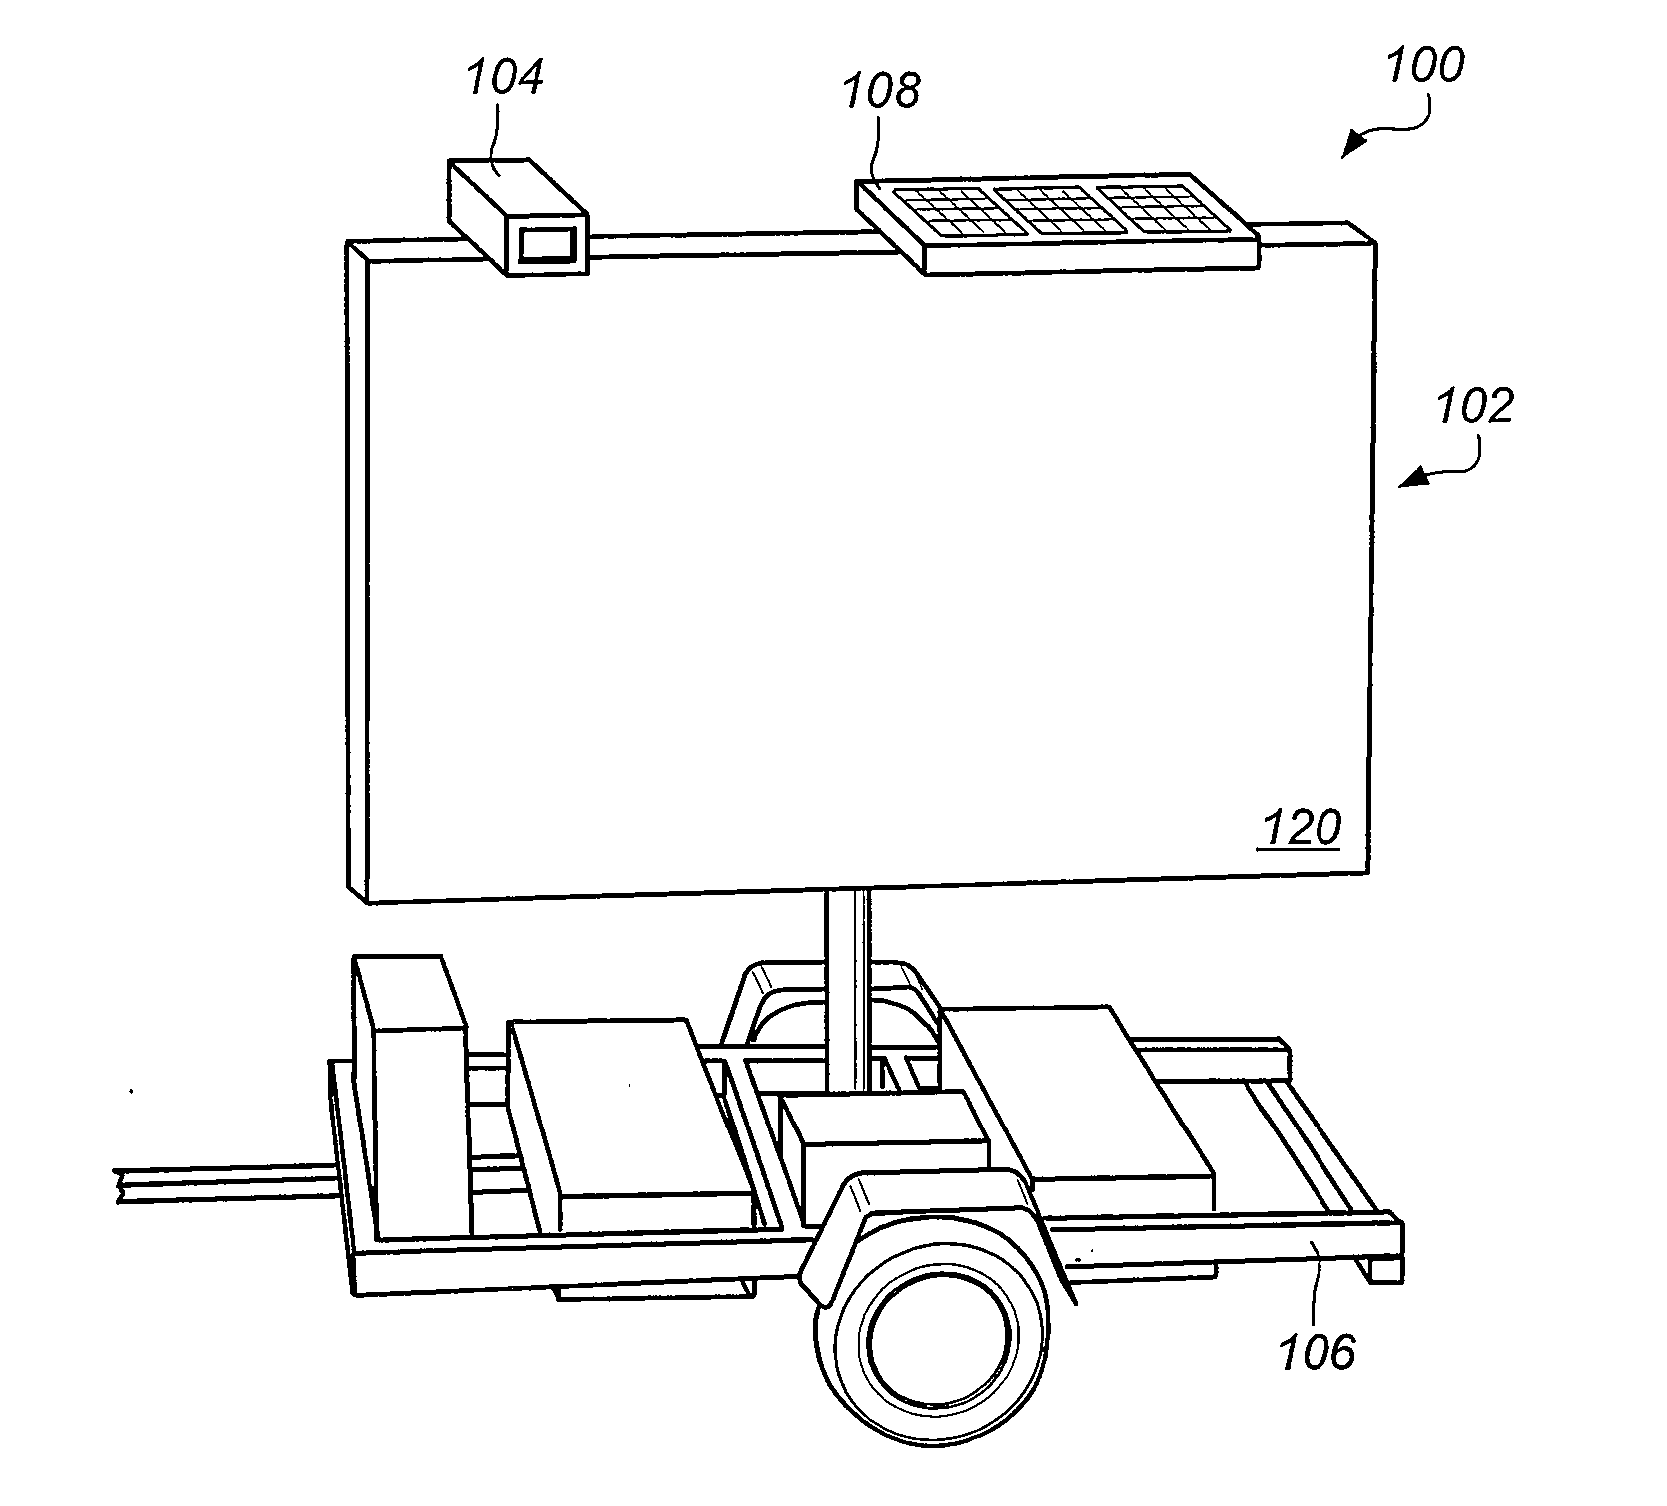 Message board system and method